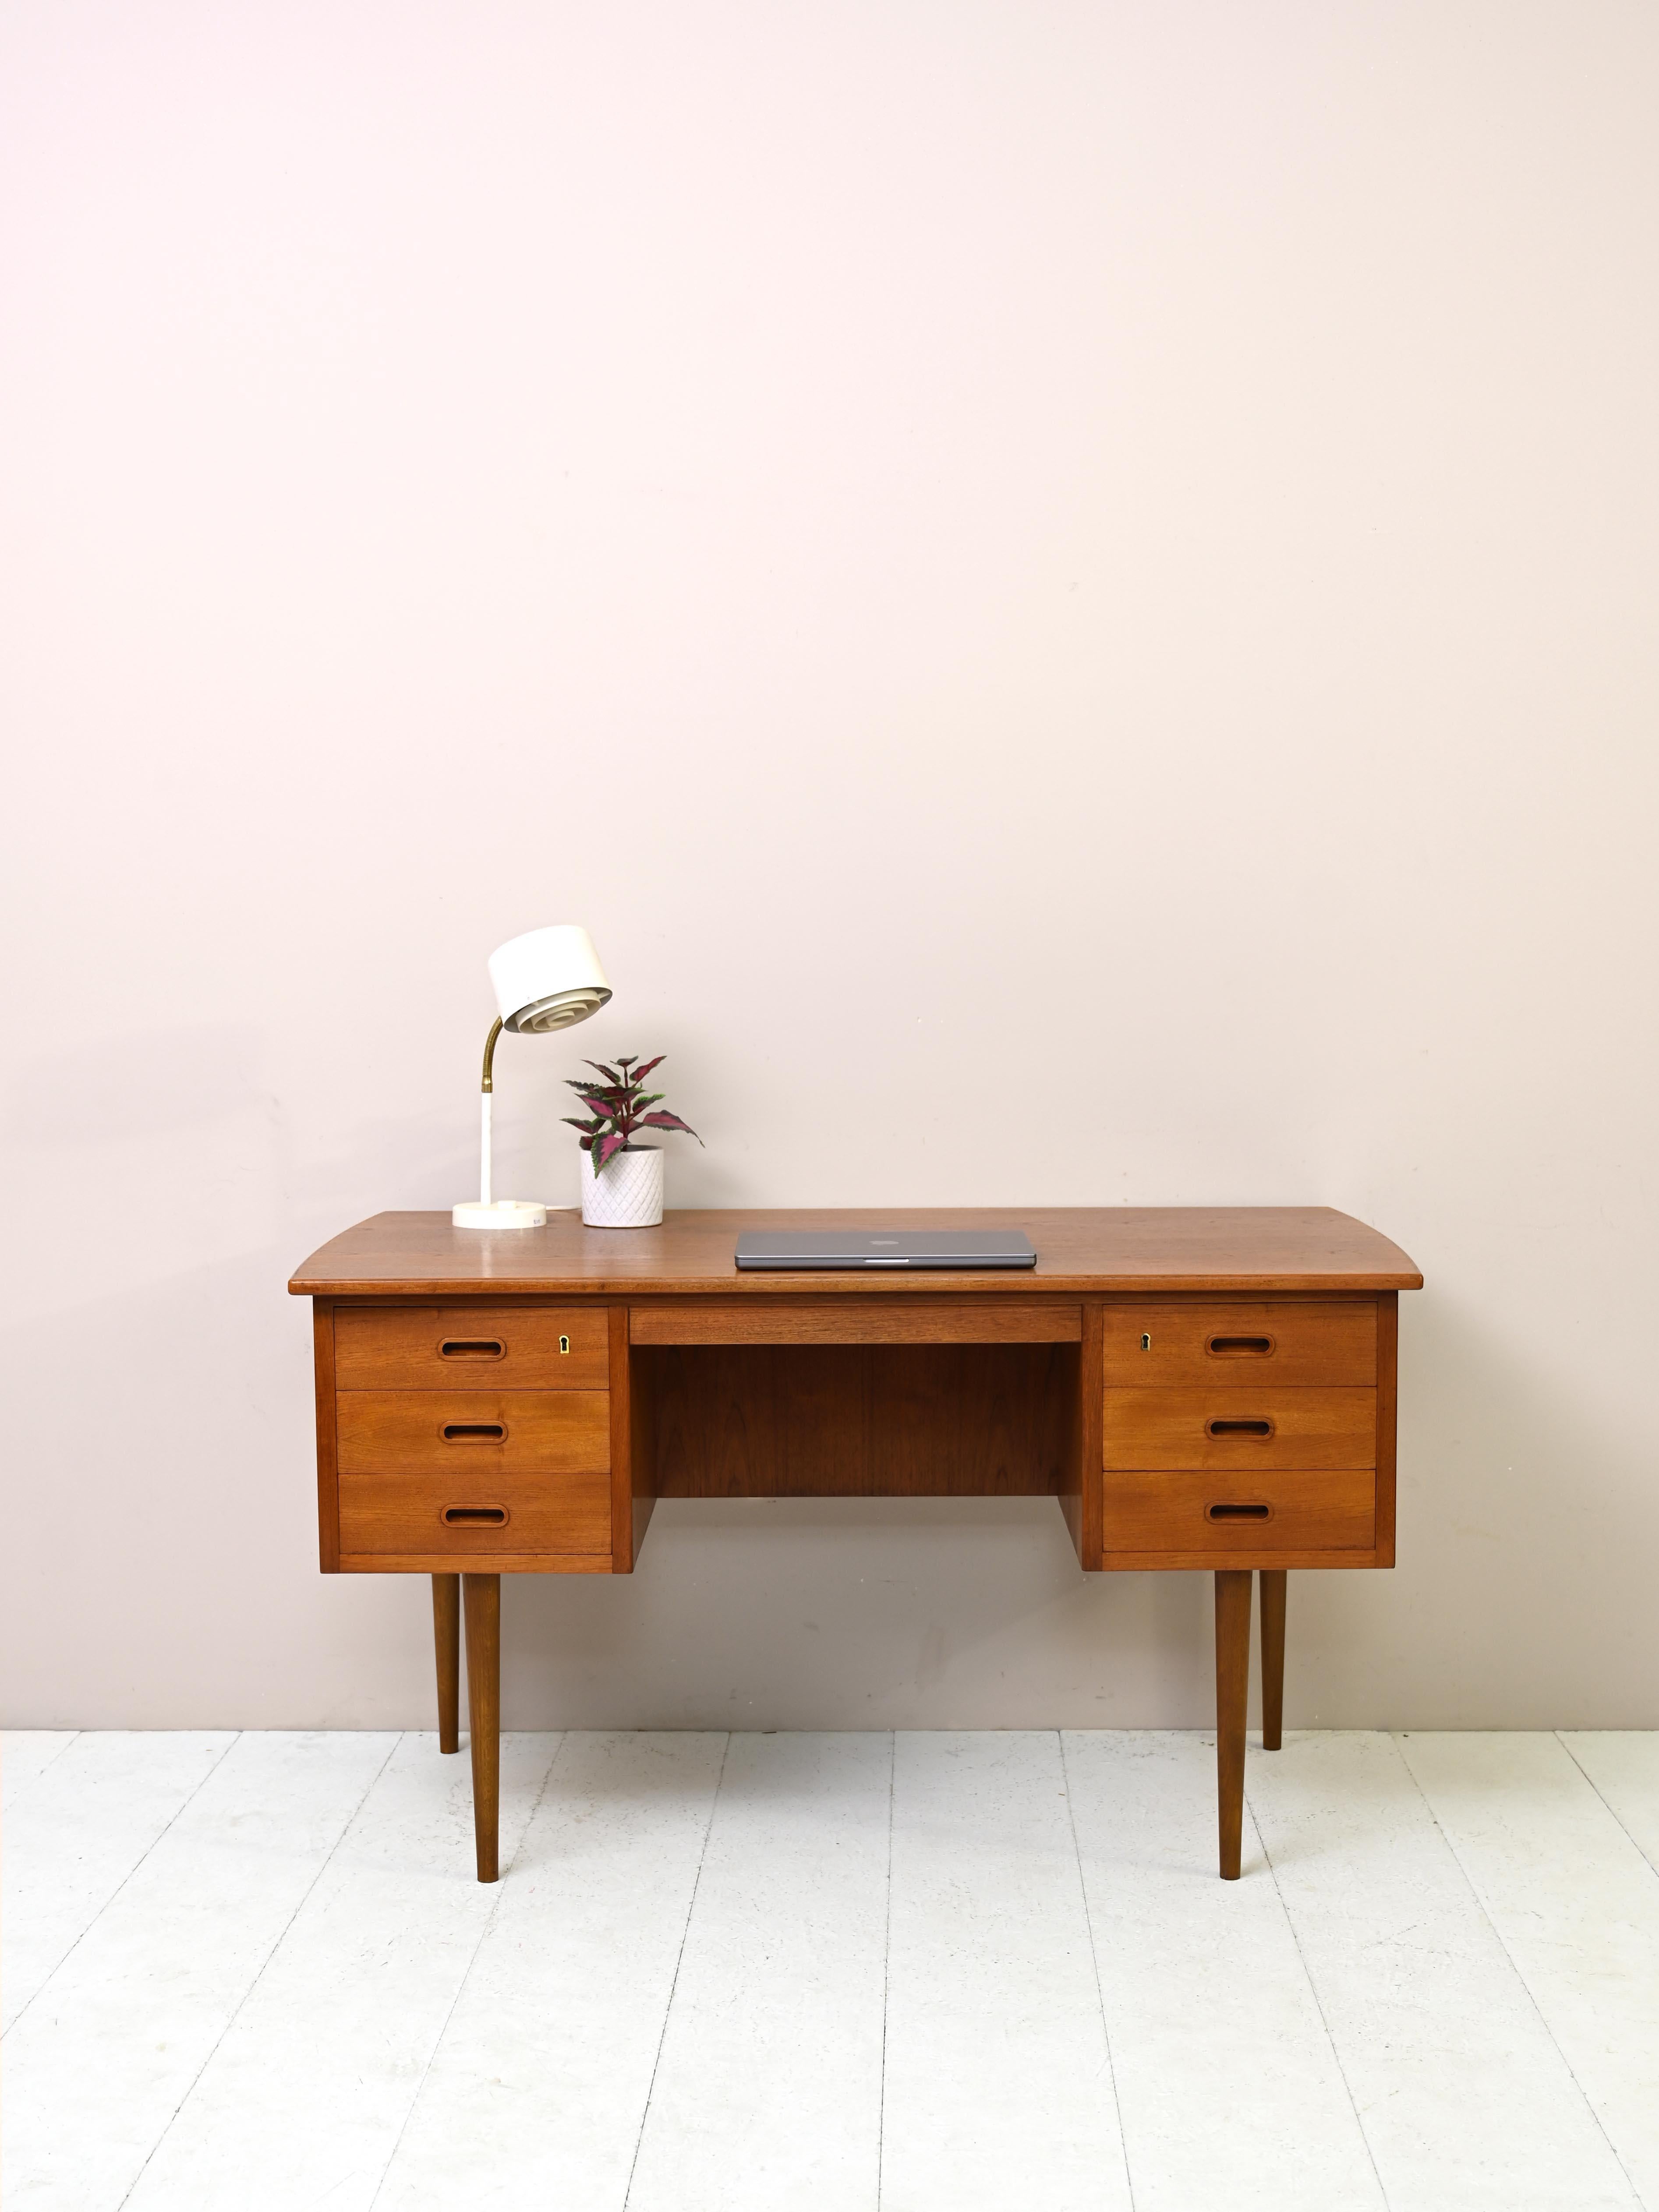 Original vintage office table with drawers. 

An elegant desk of Danish manufacture, also finished on the back and therefore called 